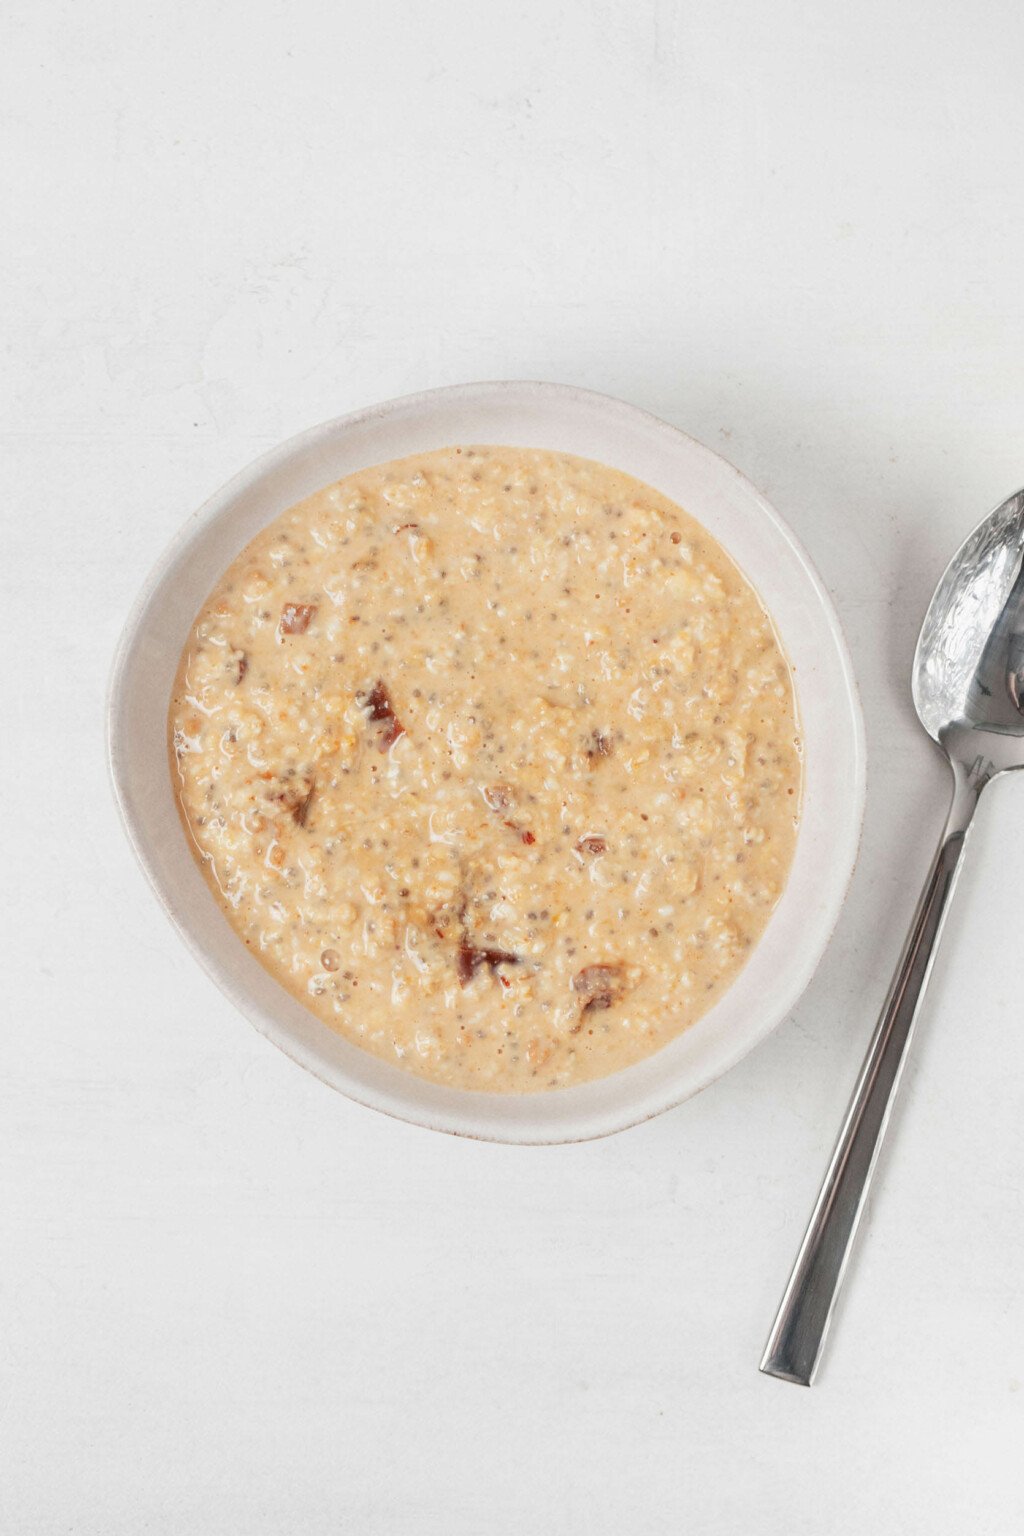 An asymmetrical, white bowl is filled with oats, non-dairy milk, and chia seeds. A teaspoon rests next to it.